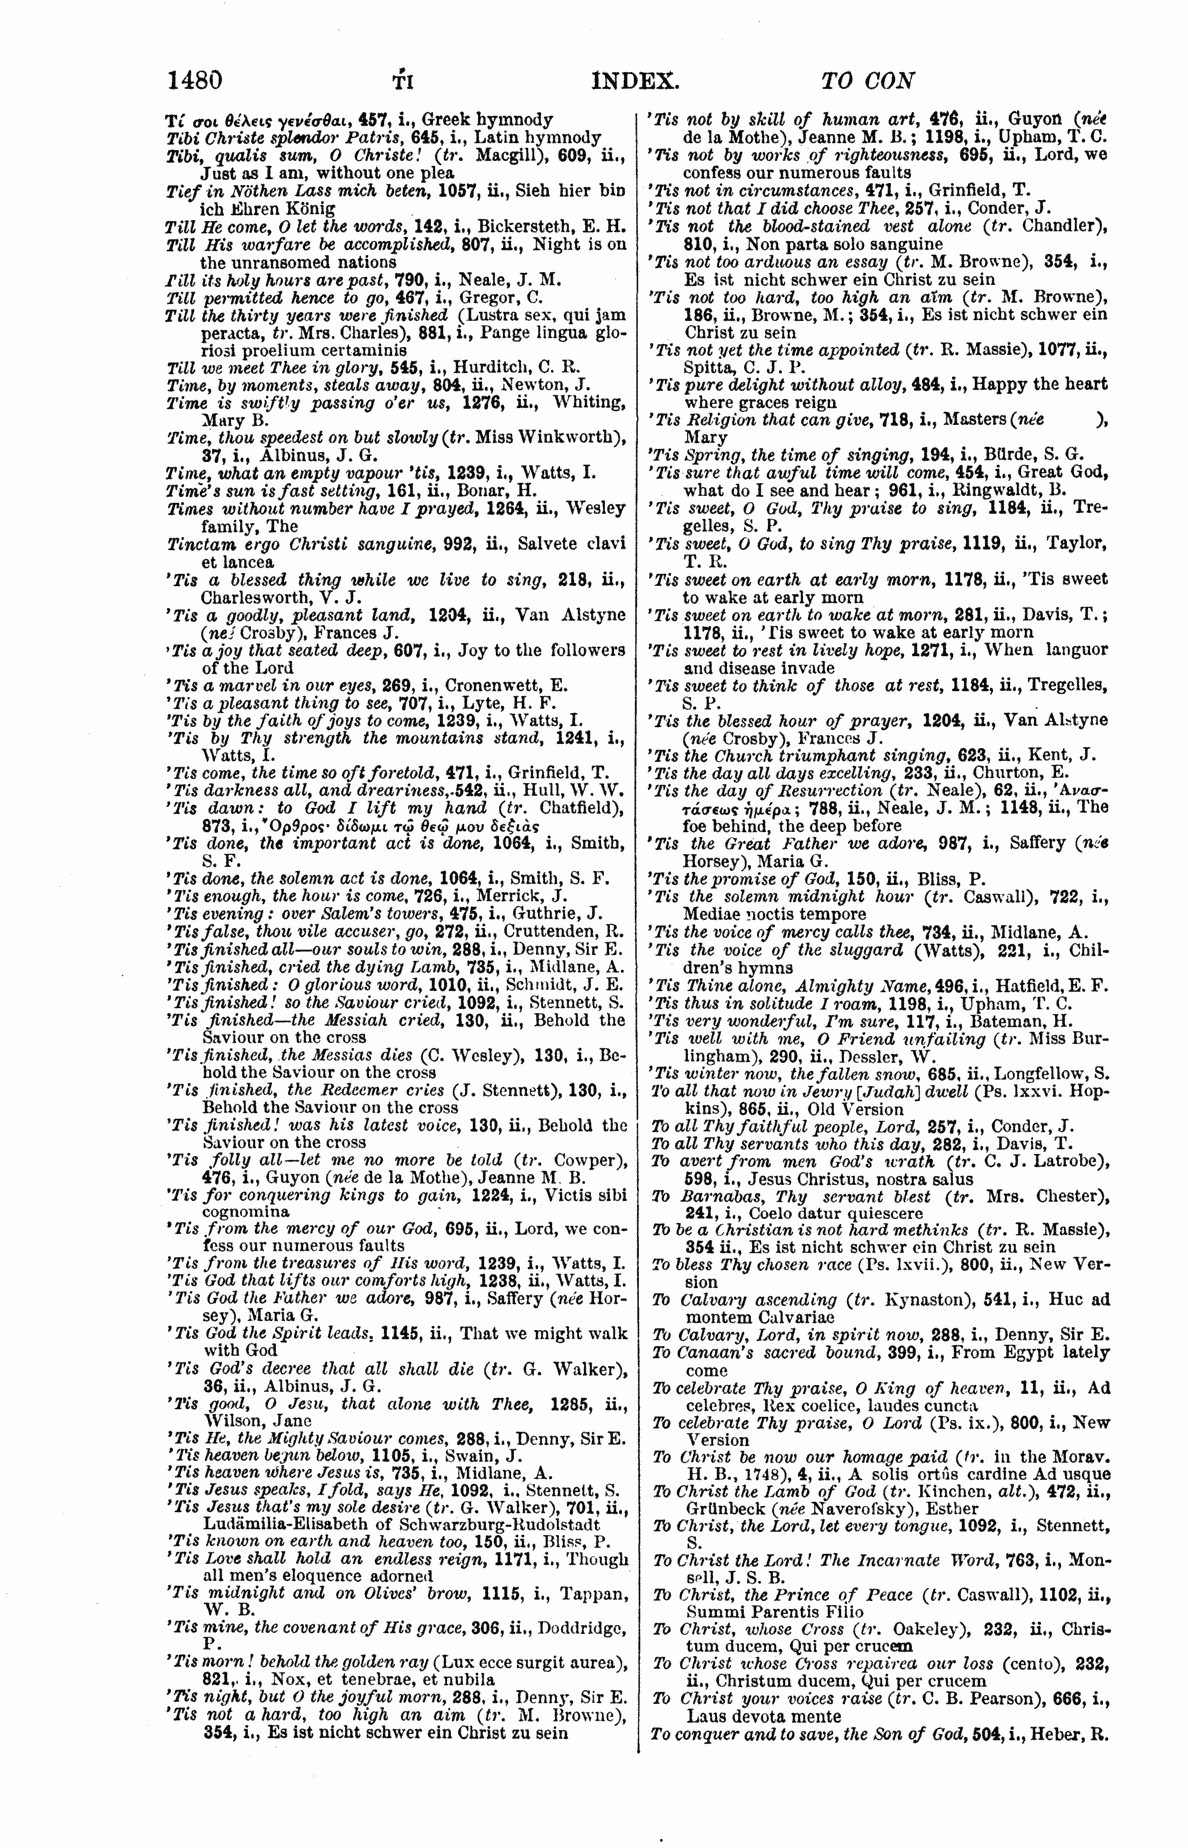 Image of page 1480